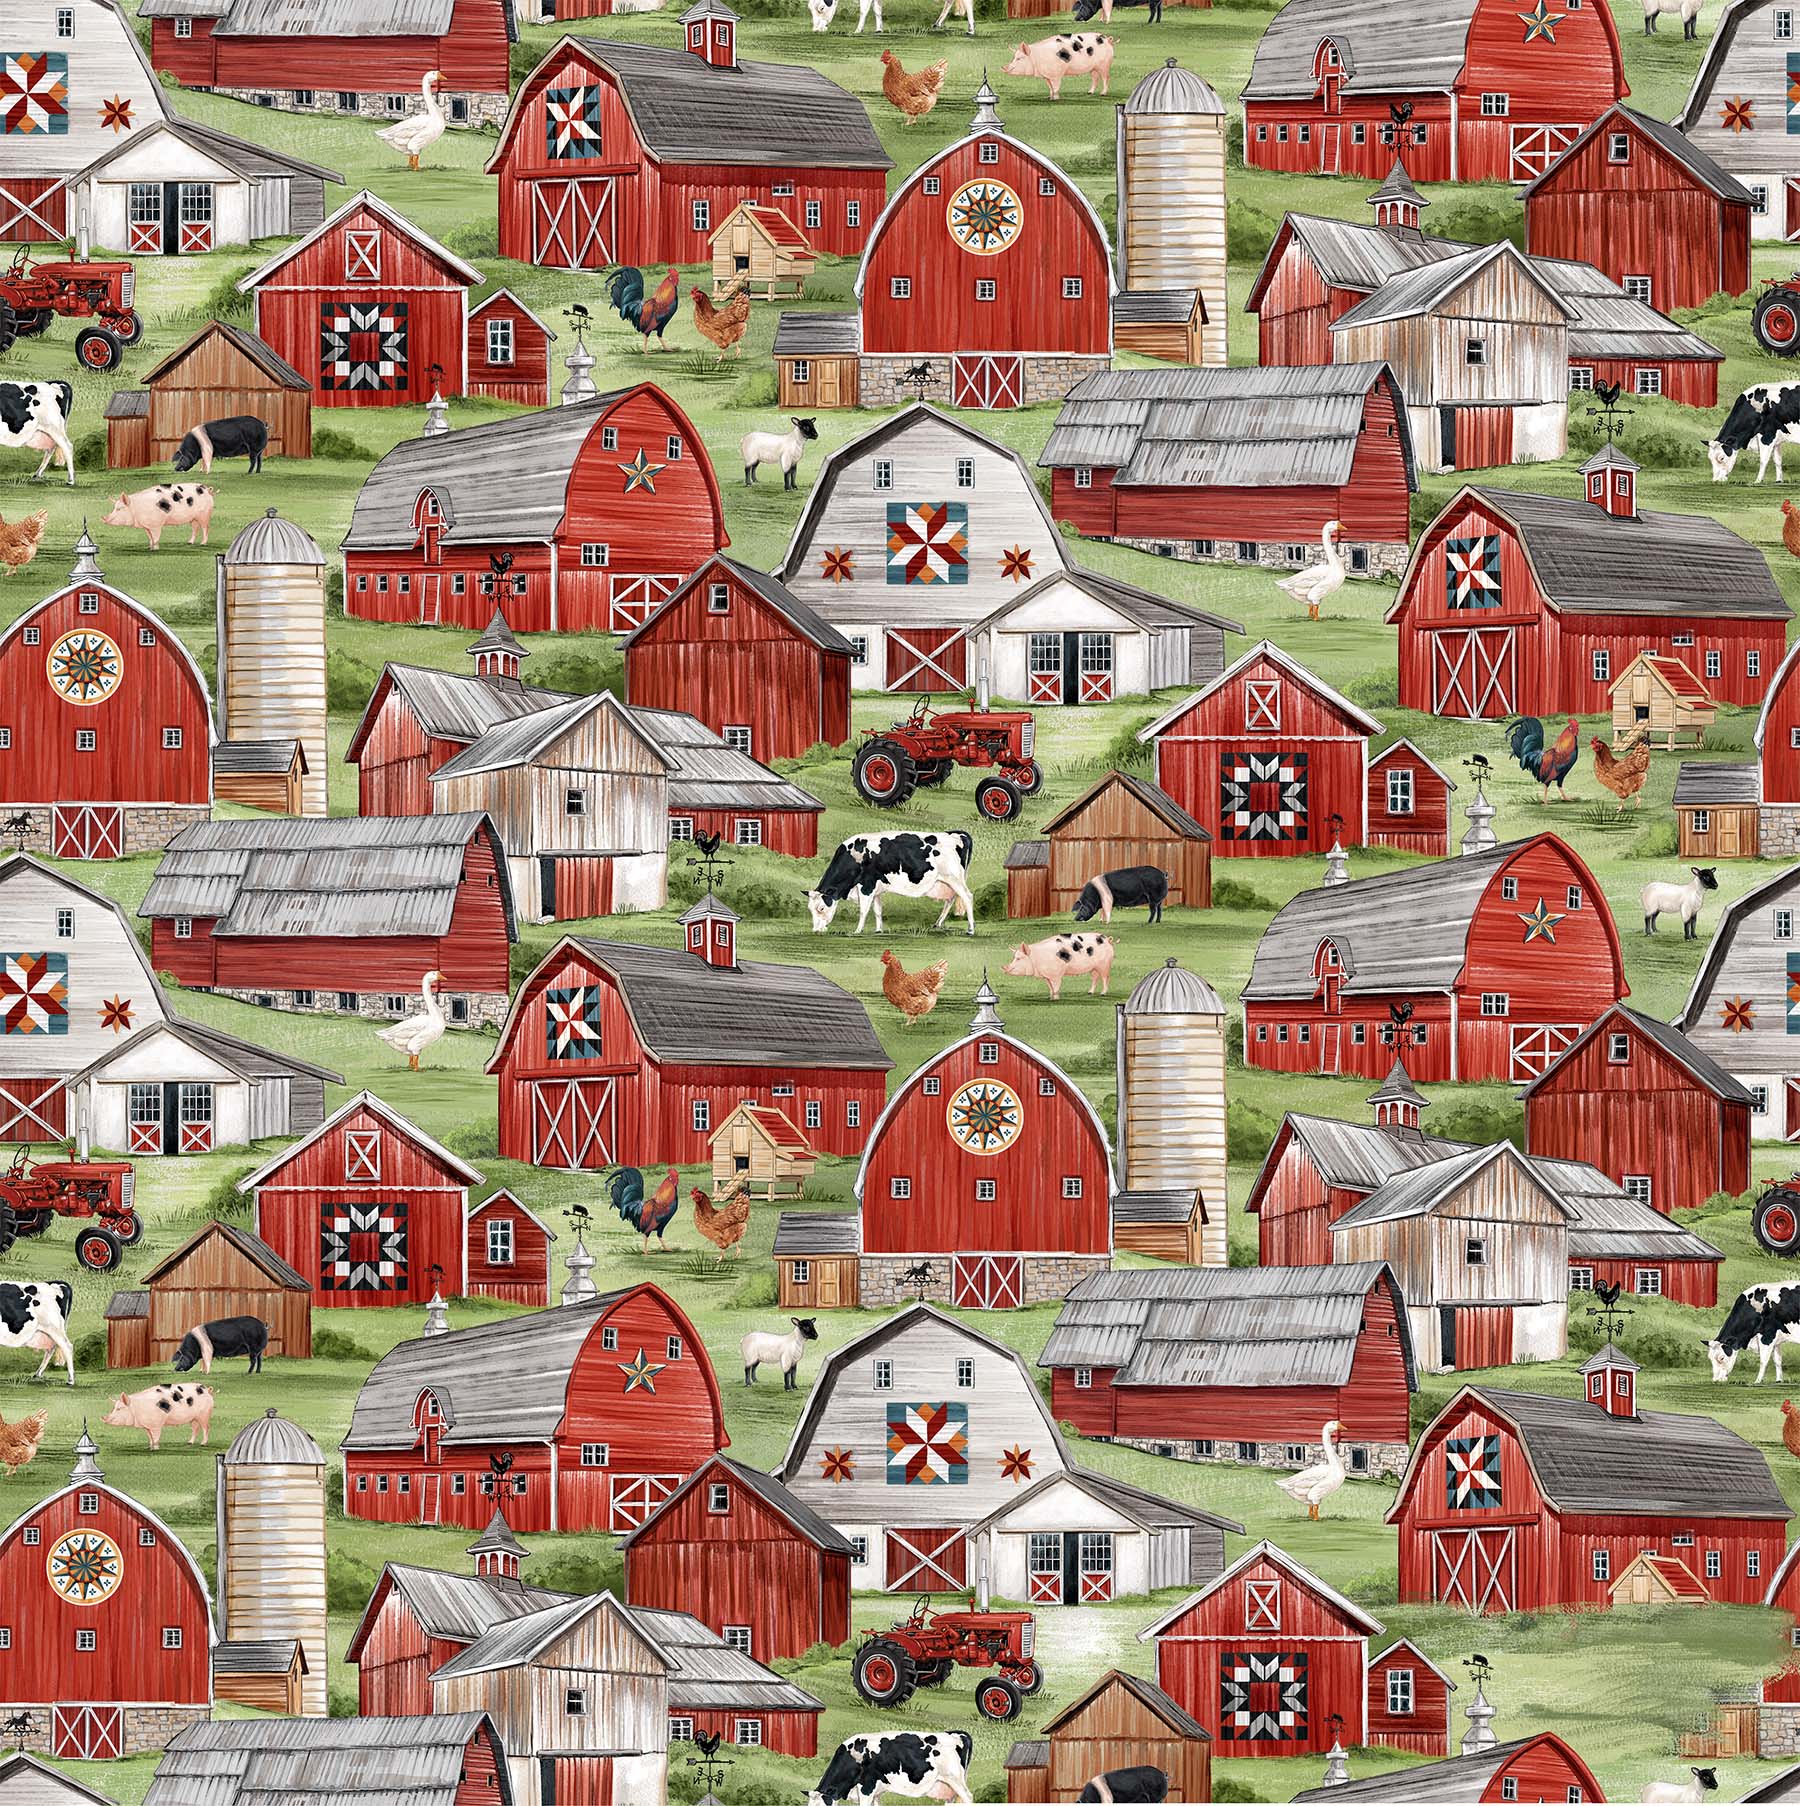 Homegrown Happiness 100% Cotton Fabric - DP24359-74 - By the Yard - Barns Green Multi